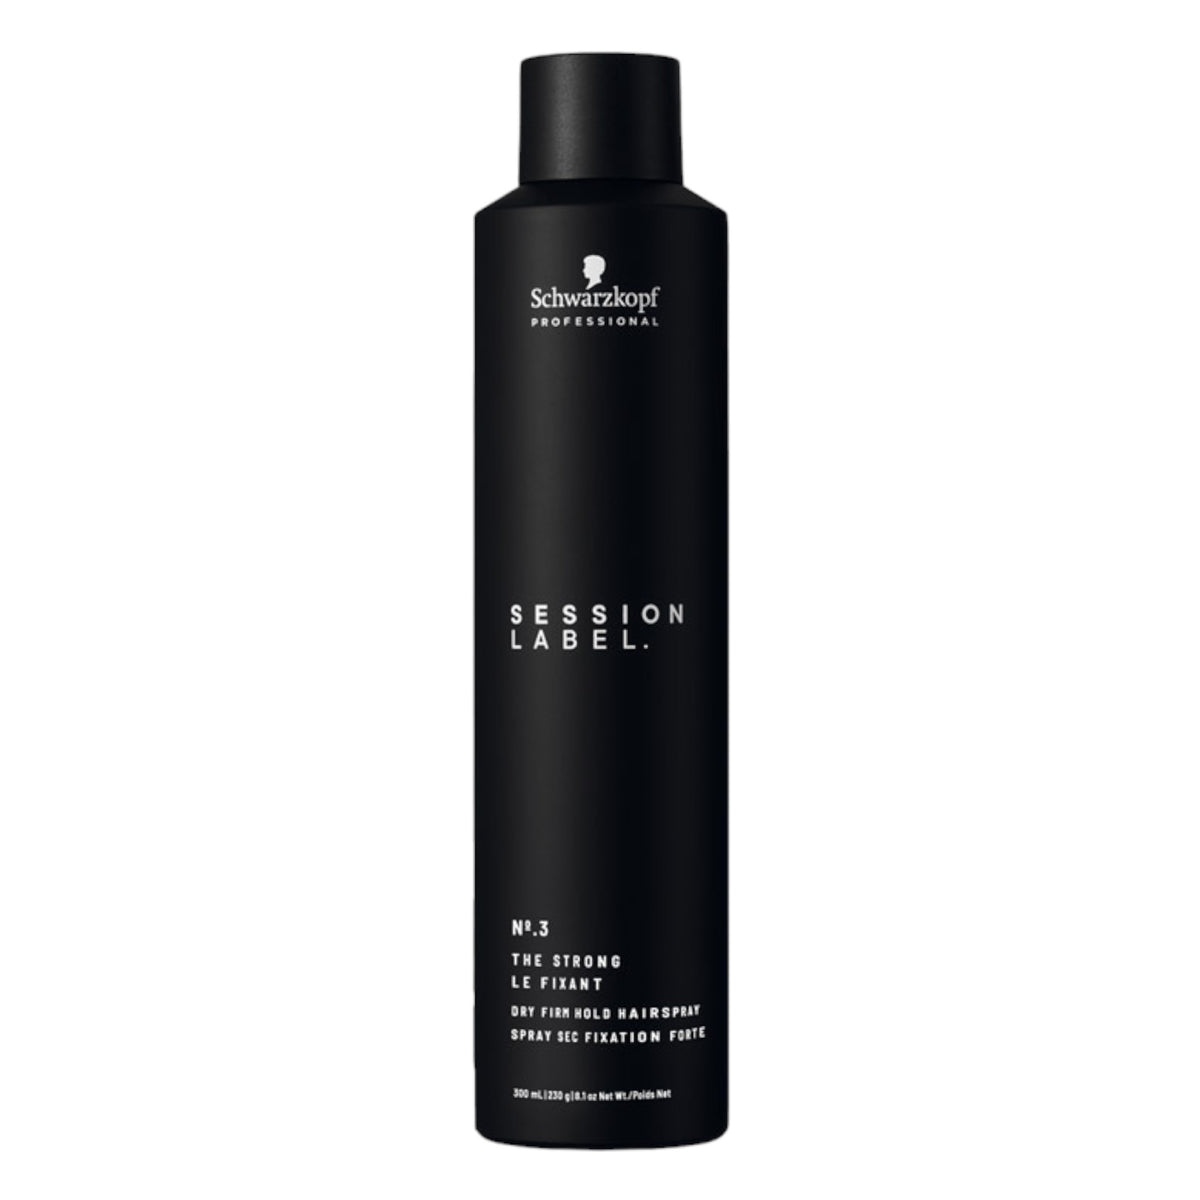 Schwarzkopf Professional Session Label The Strong 500ml